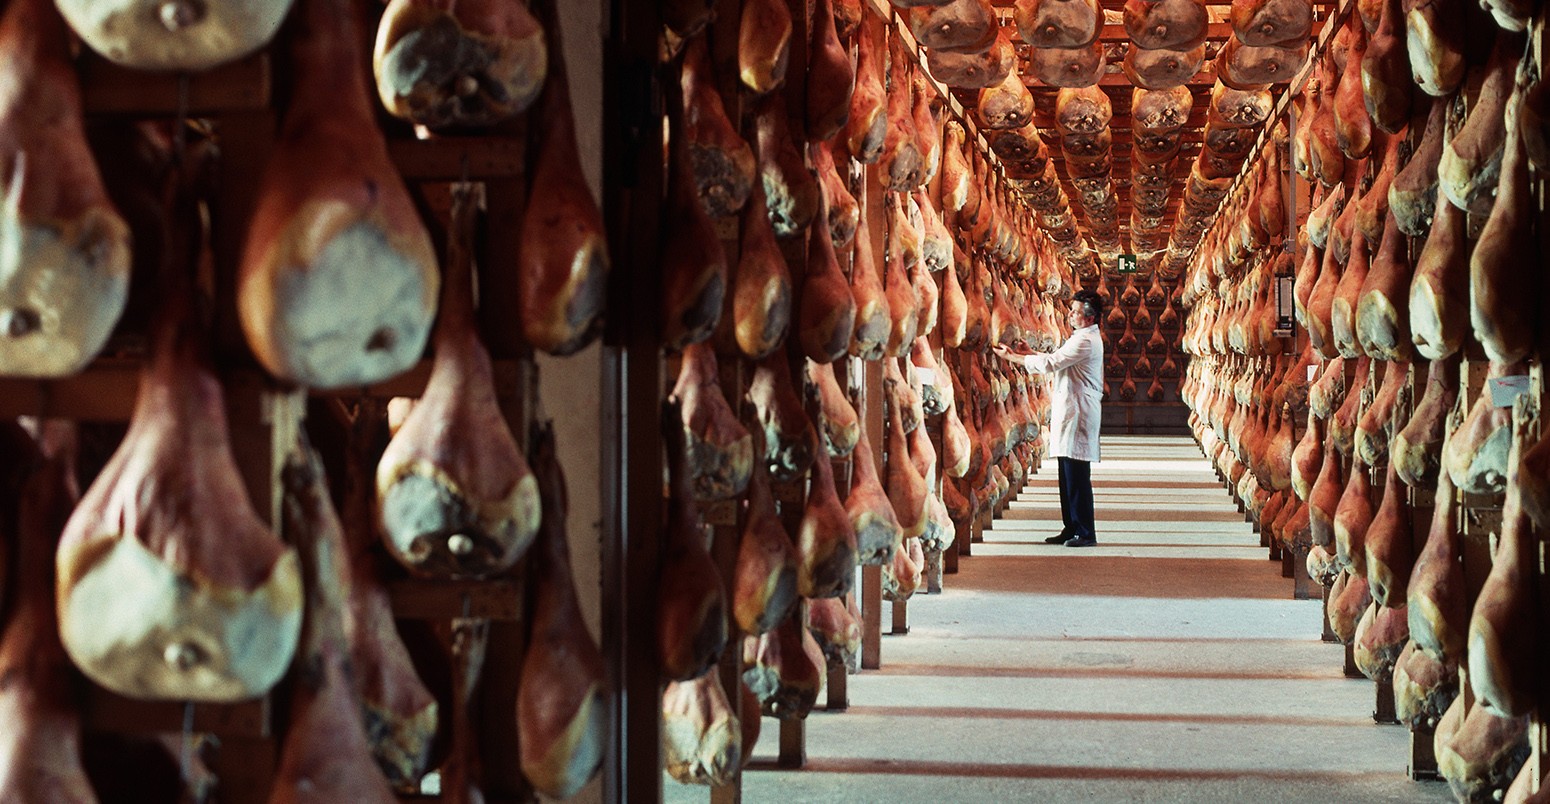 A worker stands among hundreds of hams curing in a storage room to become prosciutti at the San Daniele factory